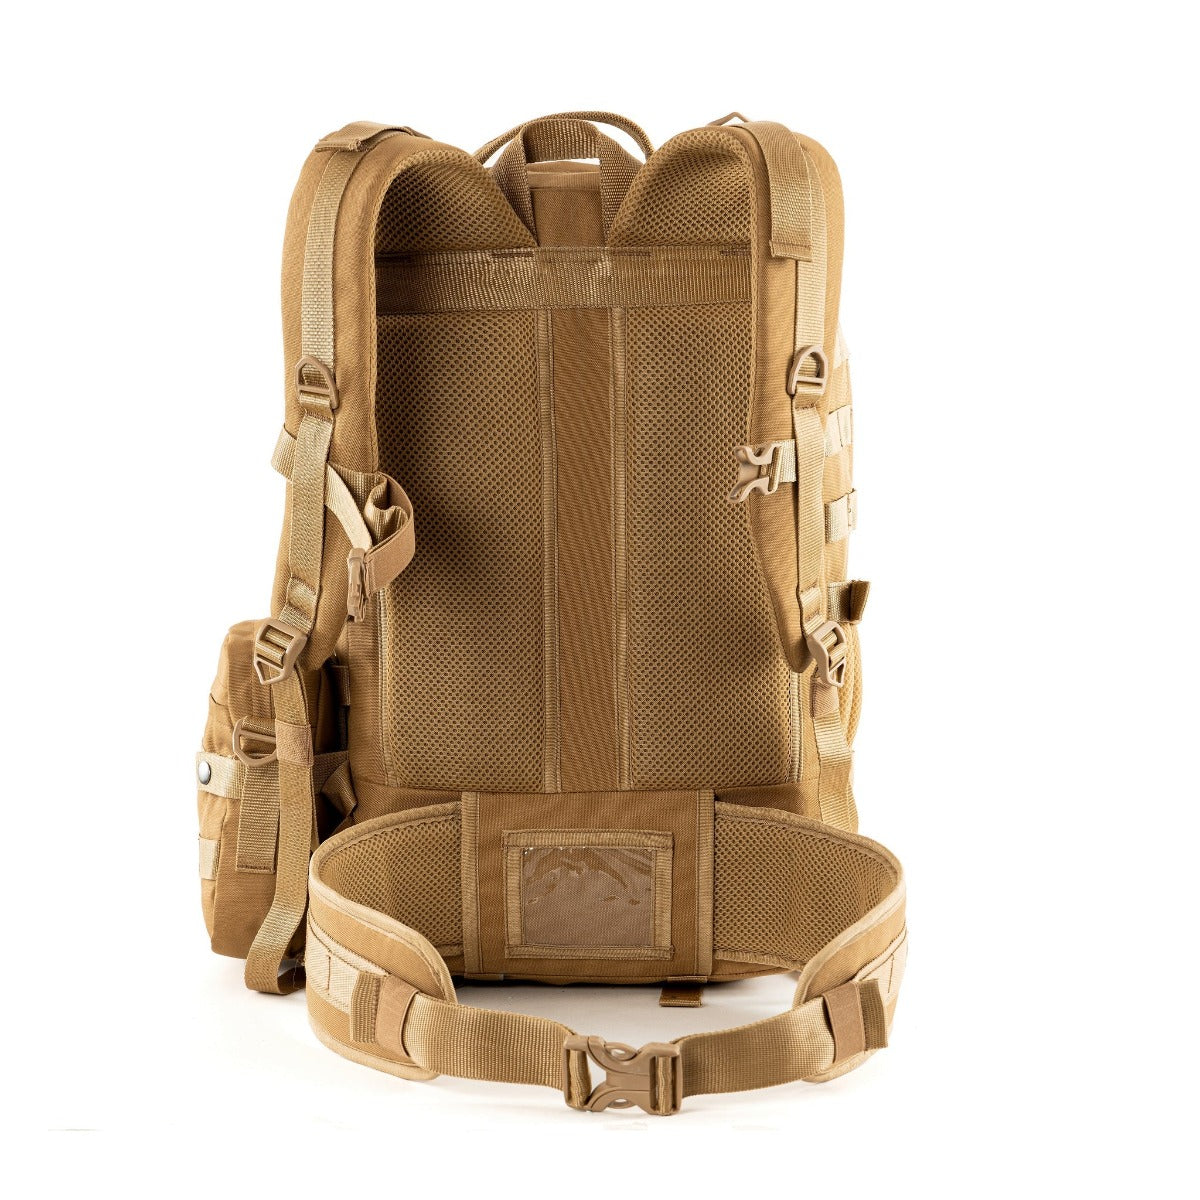 Alfa Military Tactical Backpack with Sling Bag Attachment - 45 Litres - Khaki 4